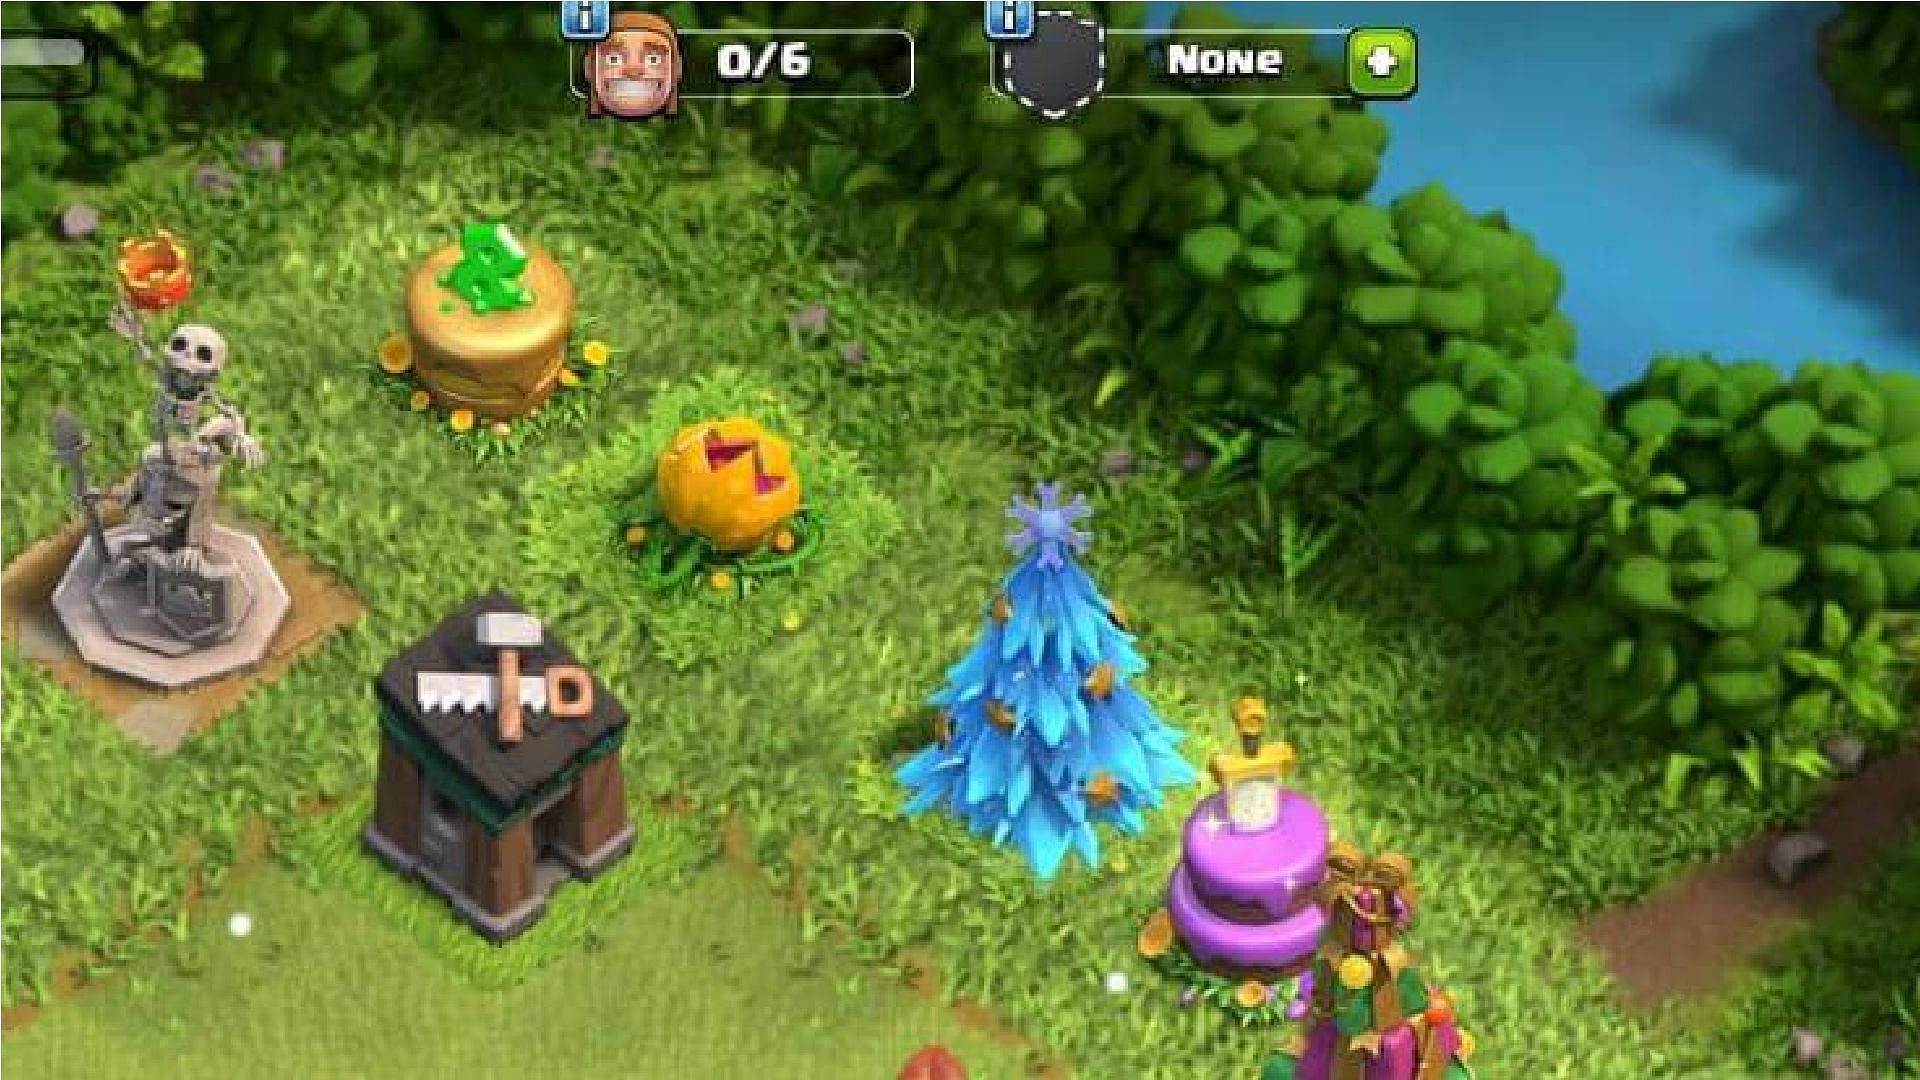 Removing obstacles can also earn you gems (Image via Supercell)